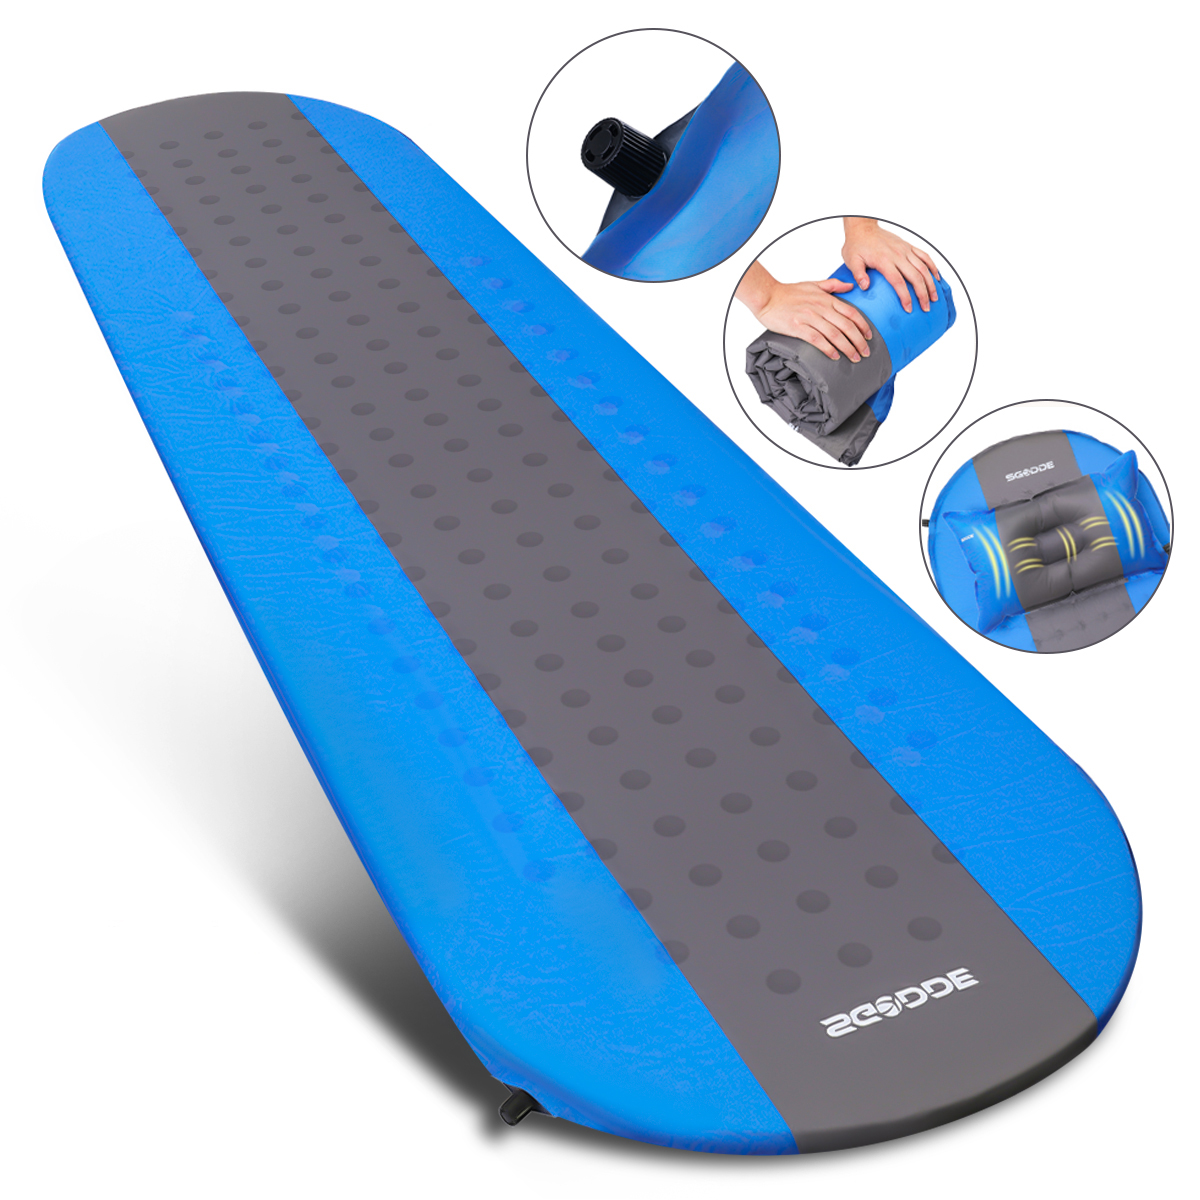 SGODDE-Inflatable-Sleeping-Mat-with-Pillow-Self-Inflating-Sleeping-Pad-Roll-Up-Foam-Bed-Pads-for-Out-1883996-1